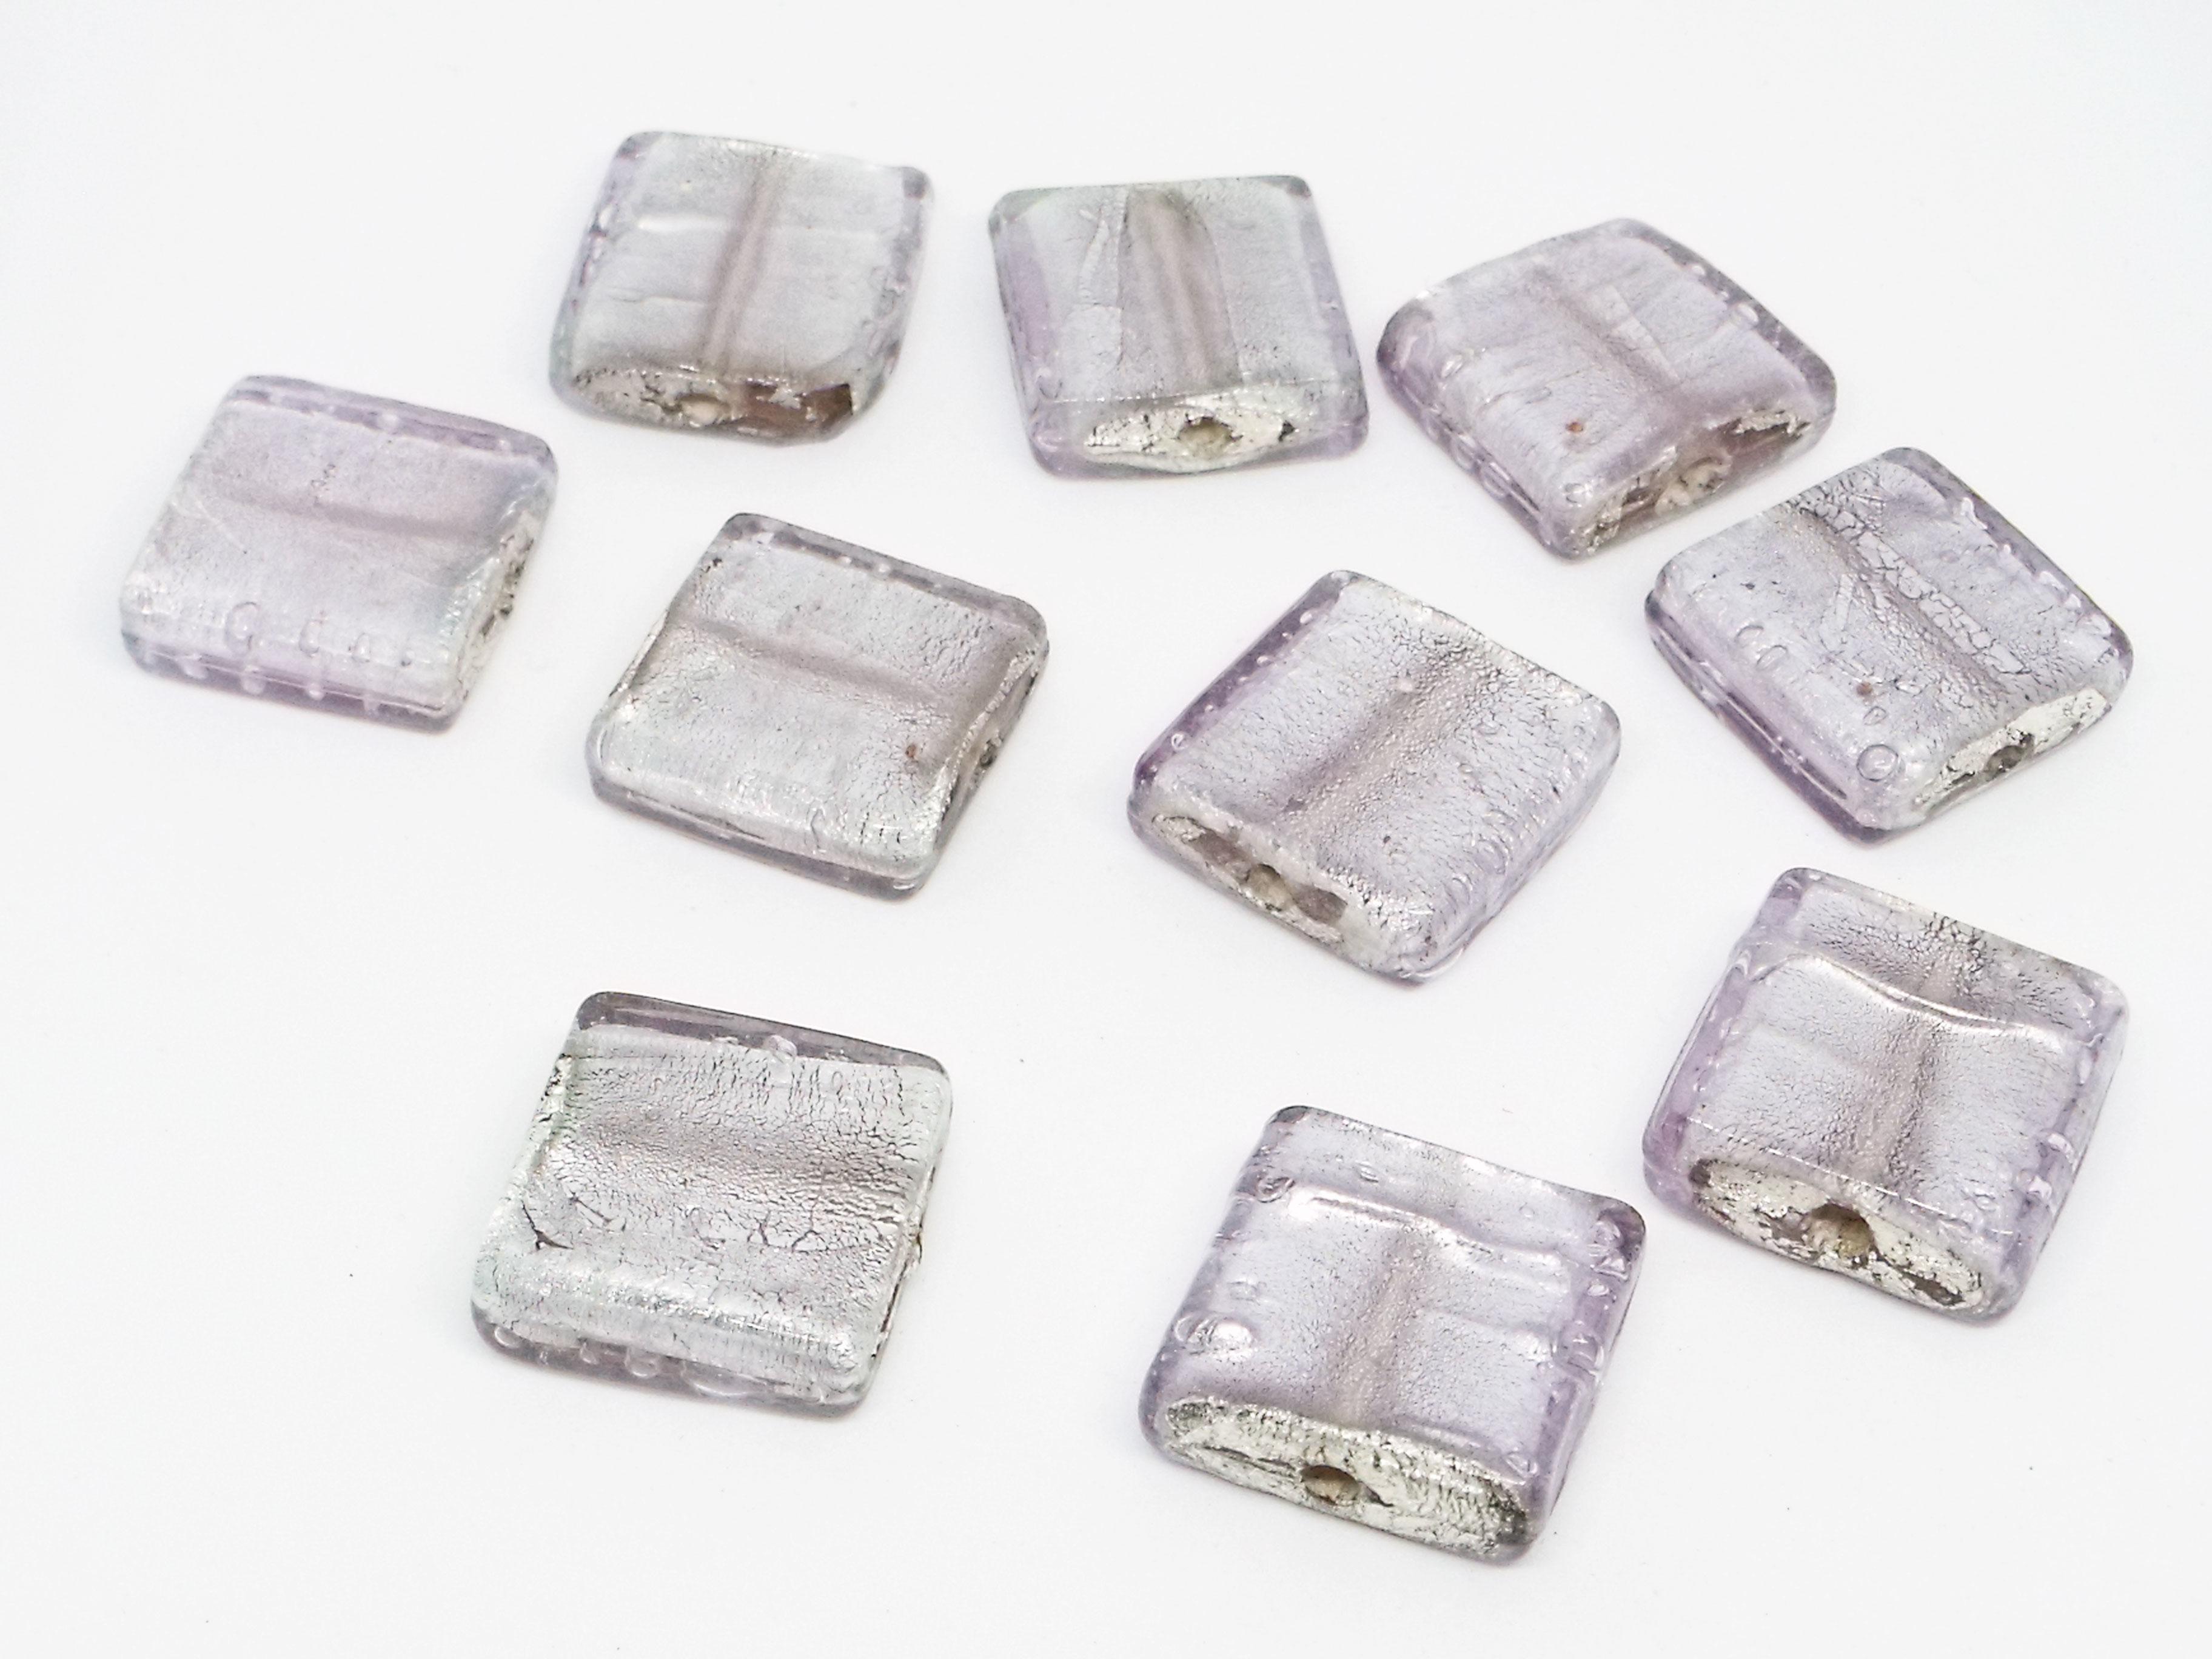 19mm Silver Foiled Square Glass Bead - Crystal Pink Blush